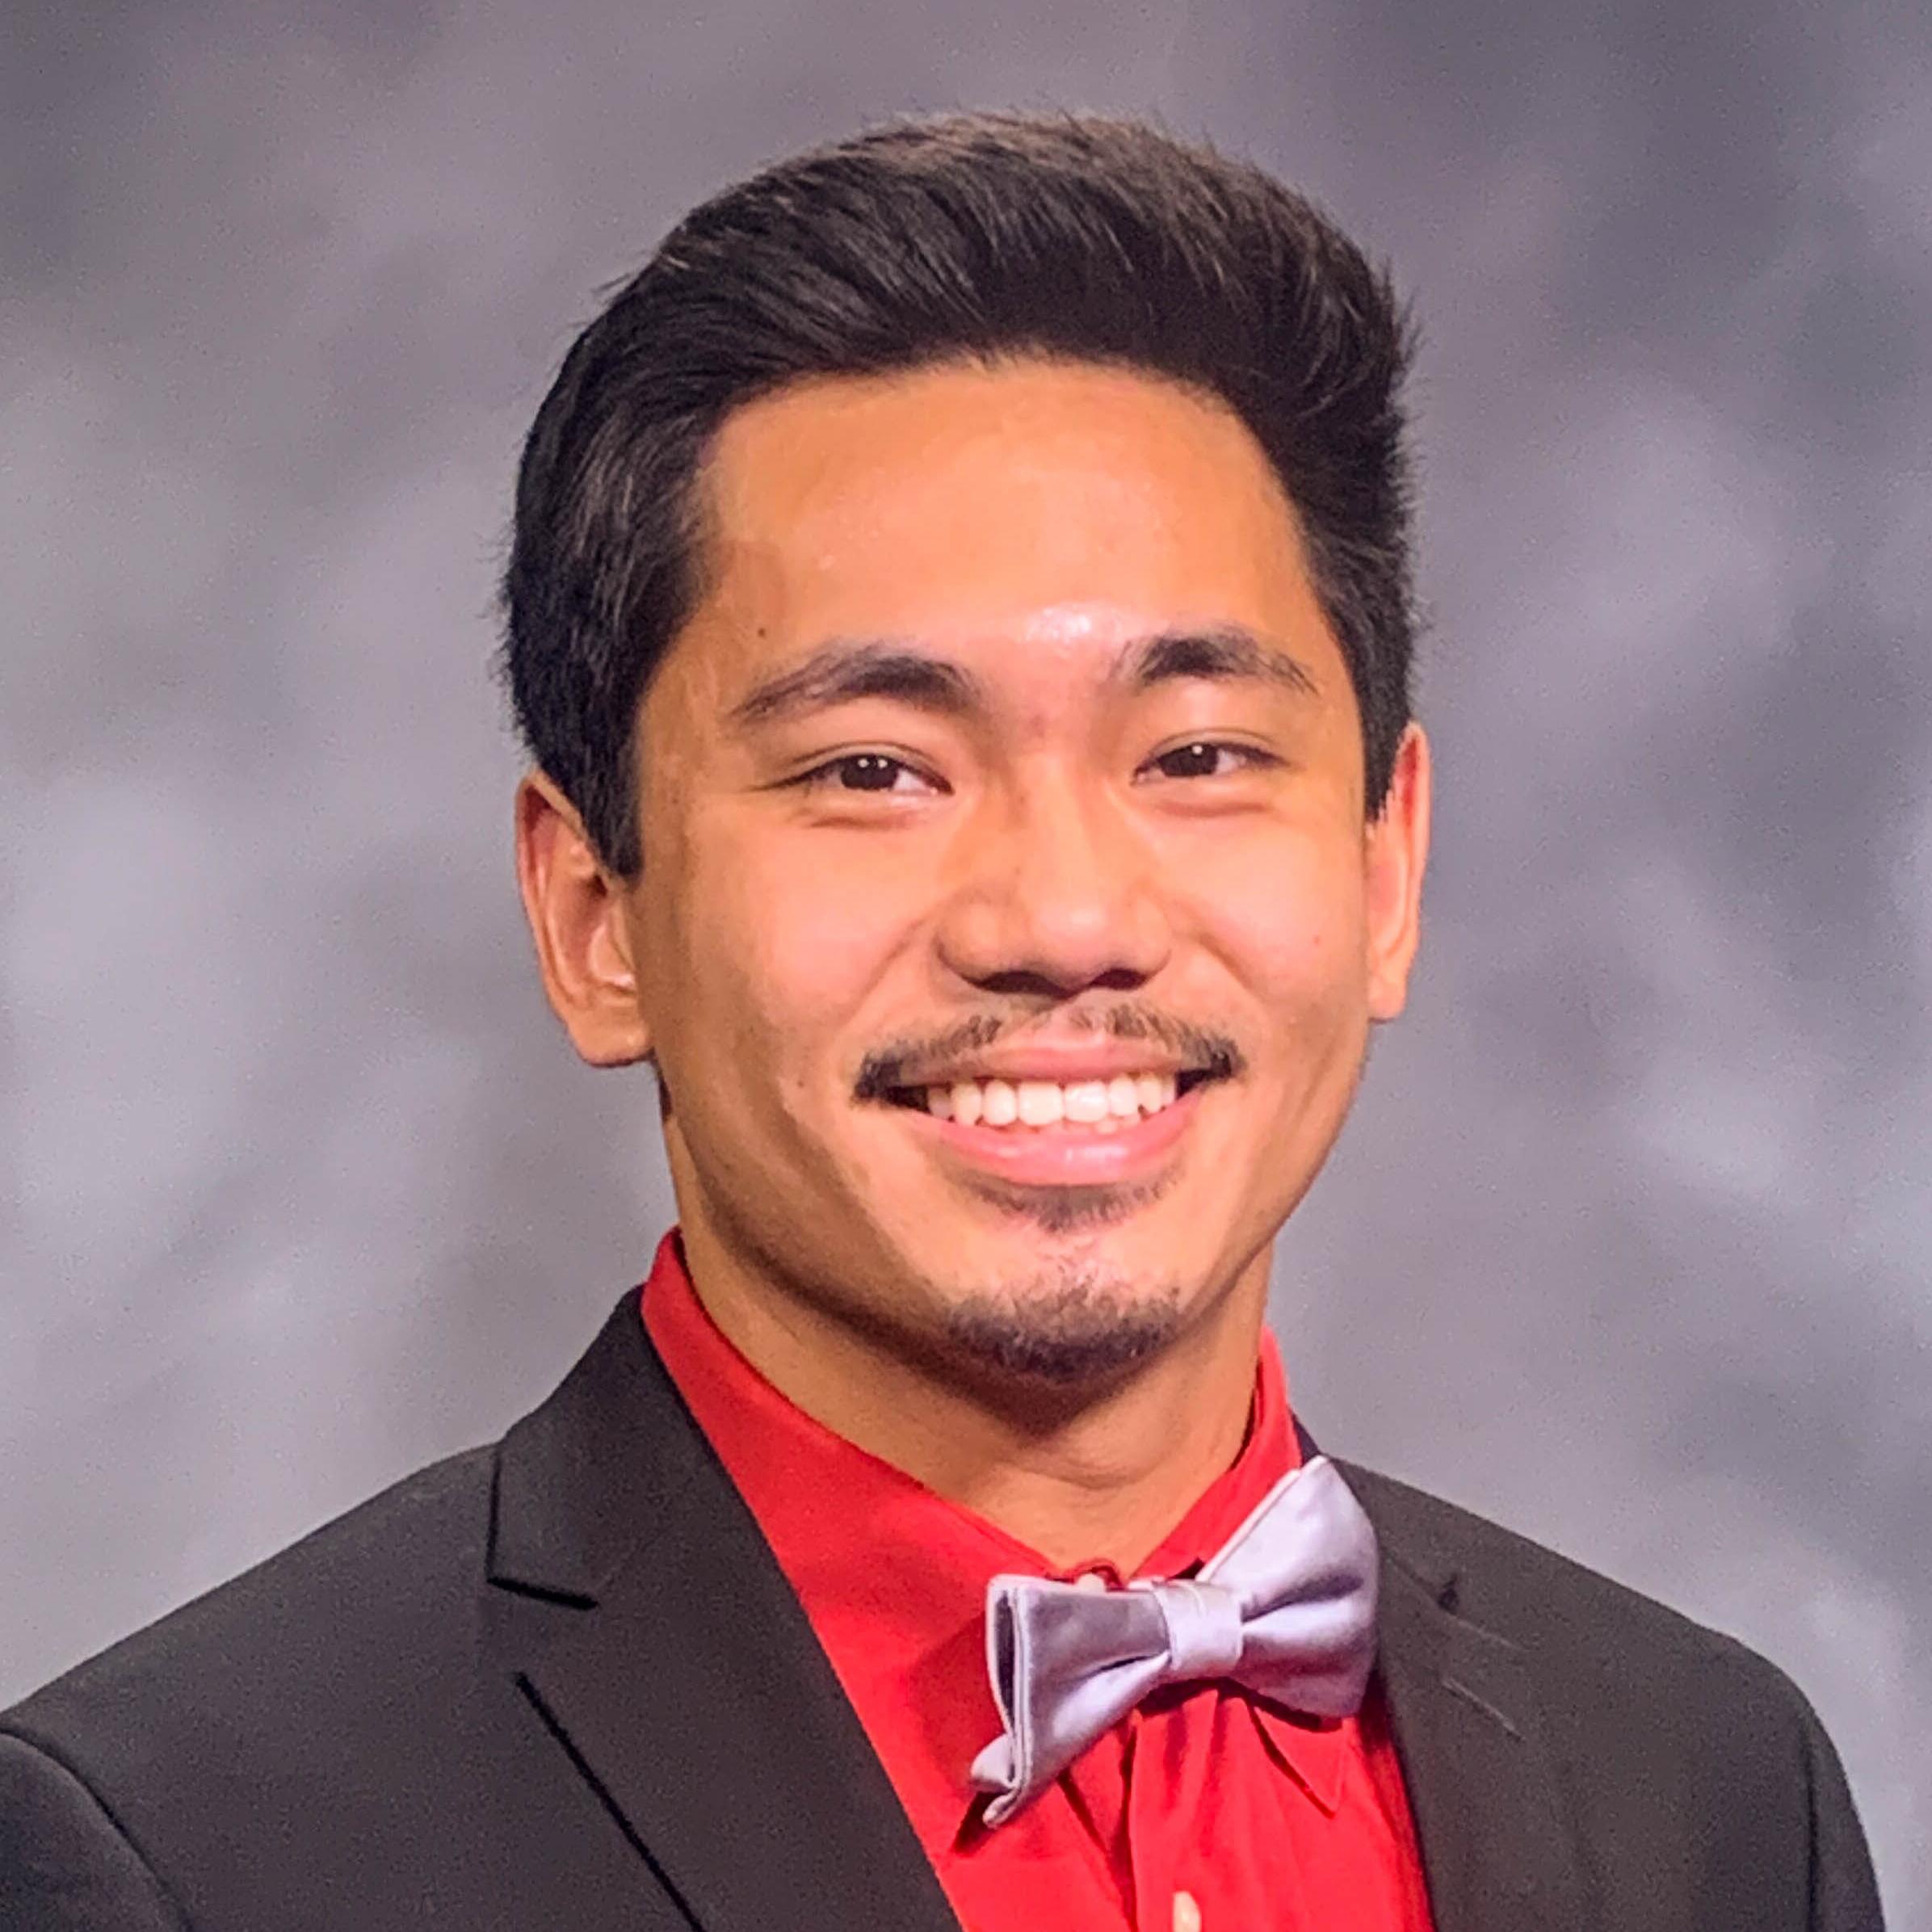 head and shoulders of man in red shirt, suit jacket and bow tie